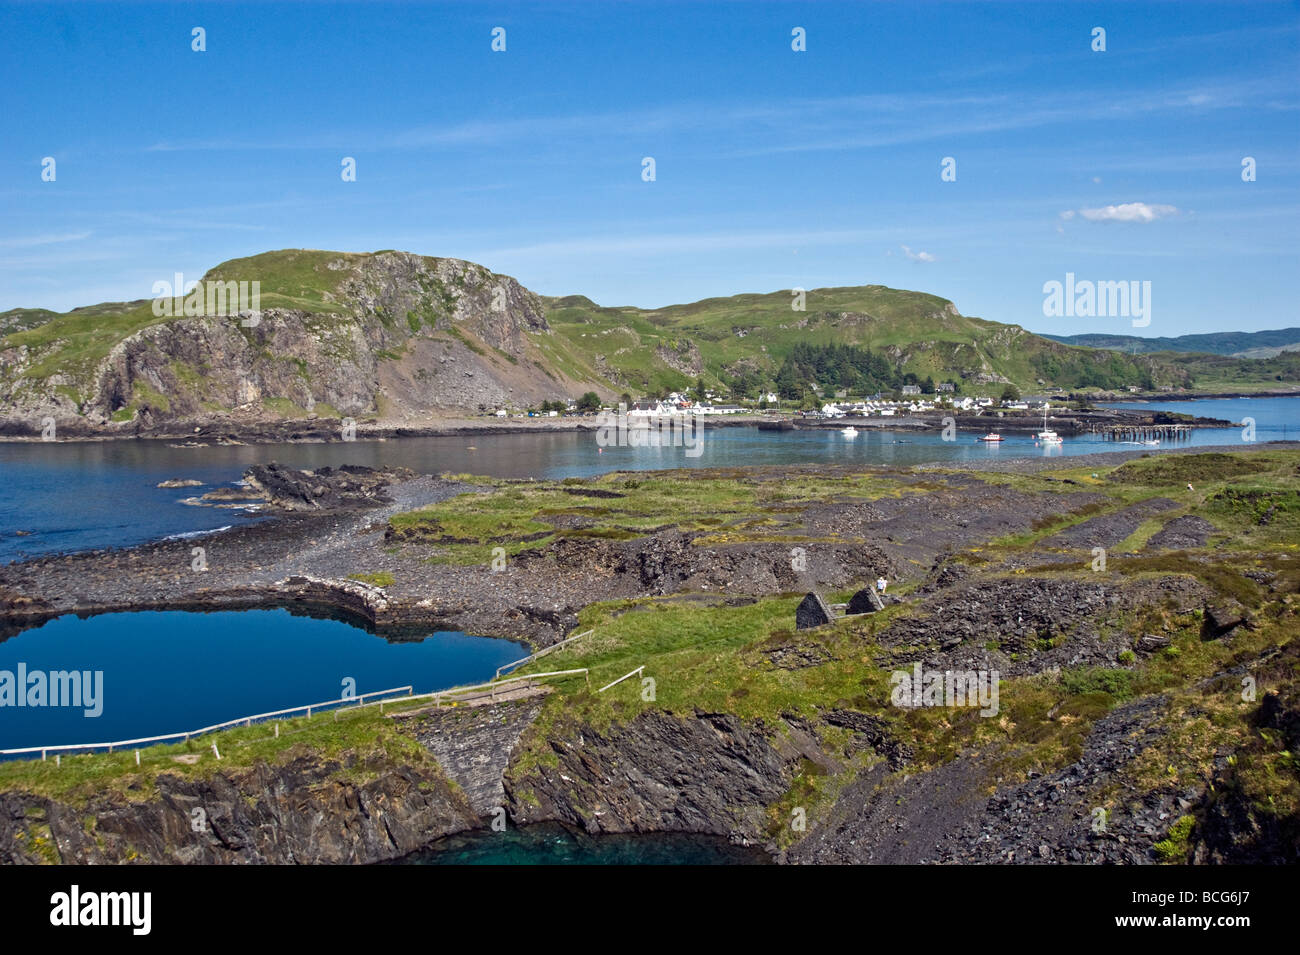 General view of  village Easdale on Seil across the water from the disused slate quarries on the Island of Easdale in Scotland. Stock Photo